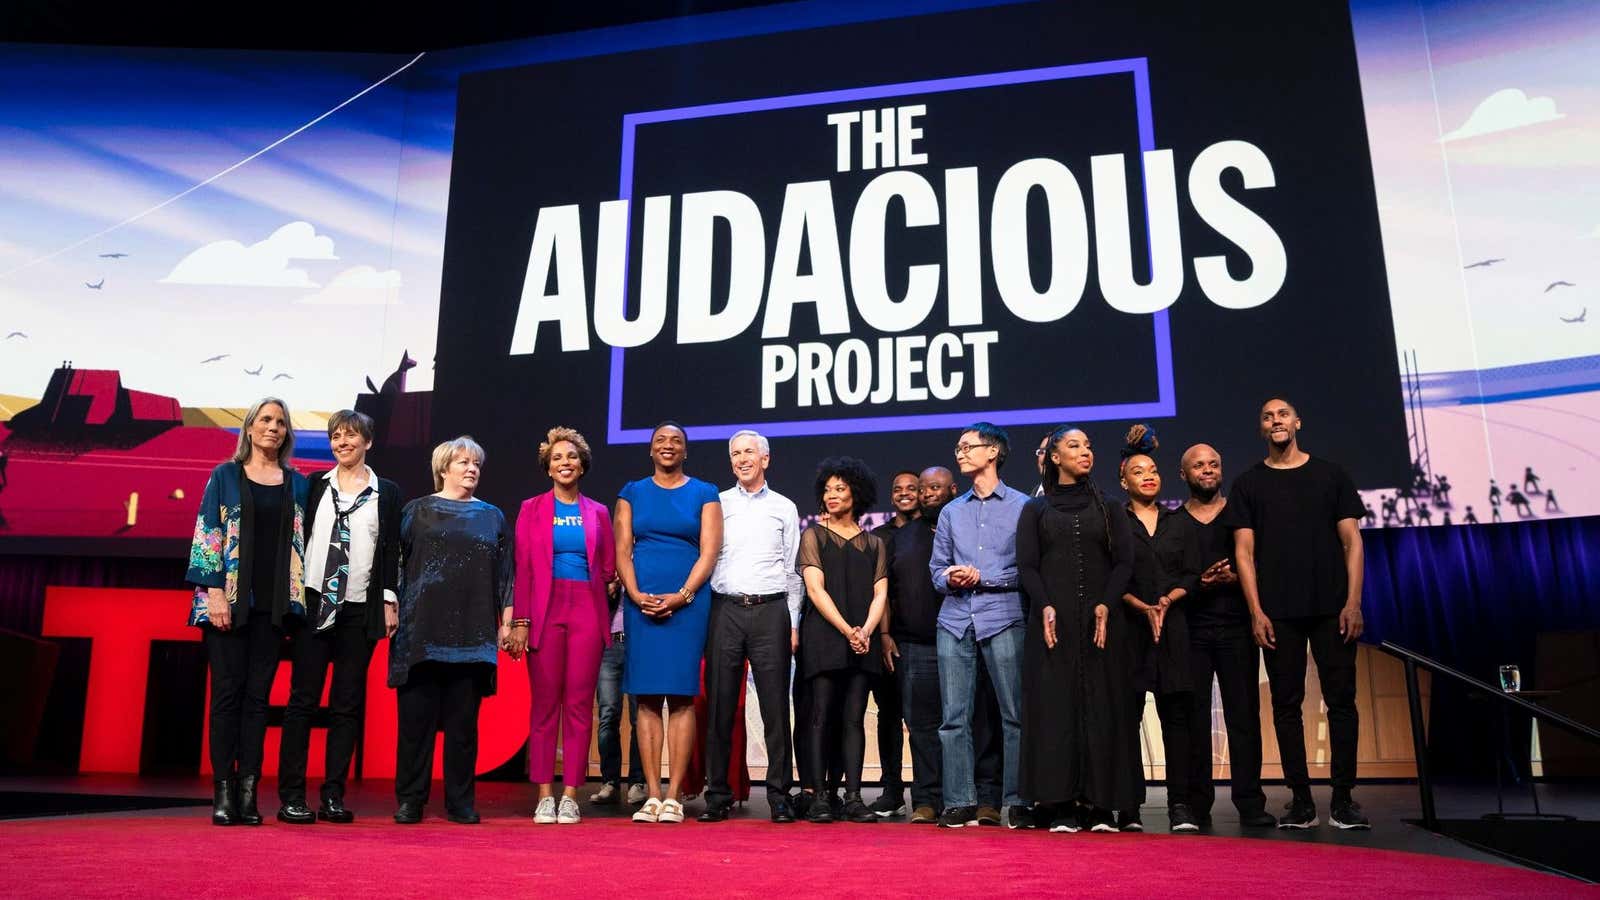 “Audacious Project” awardees at TED 2018